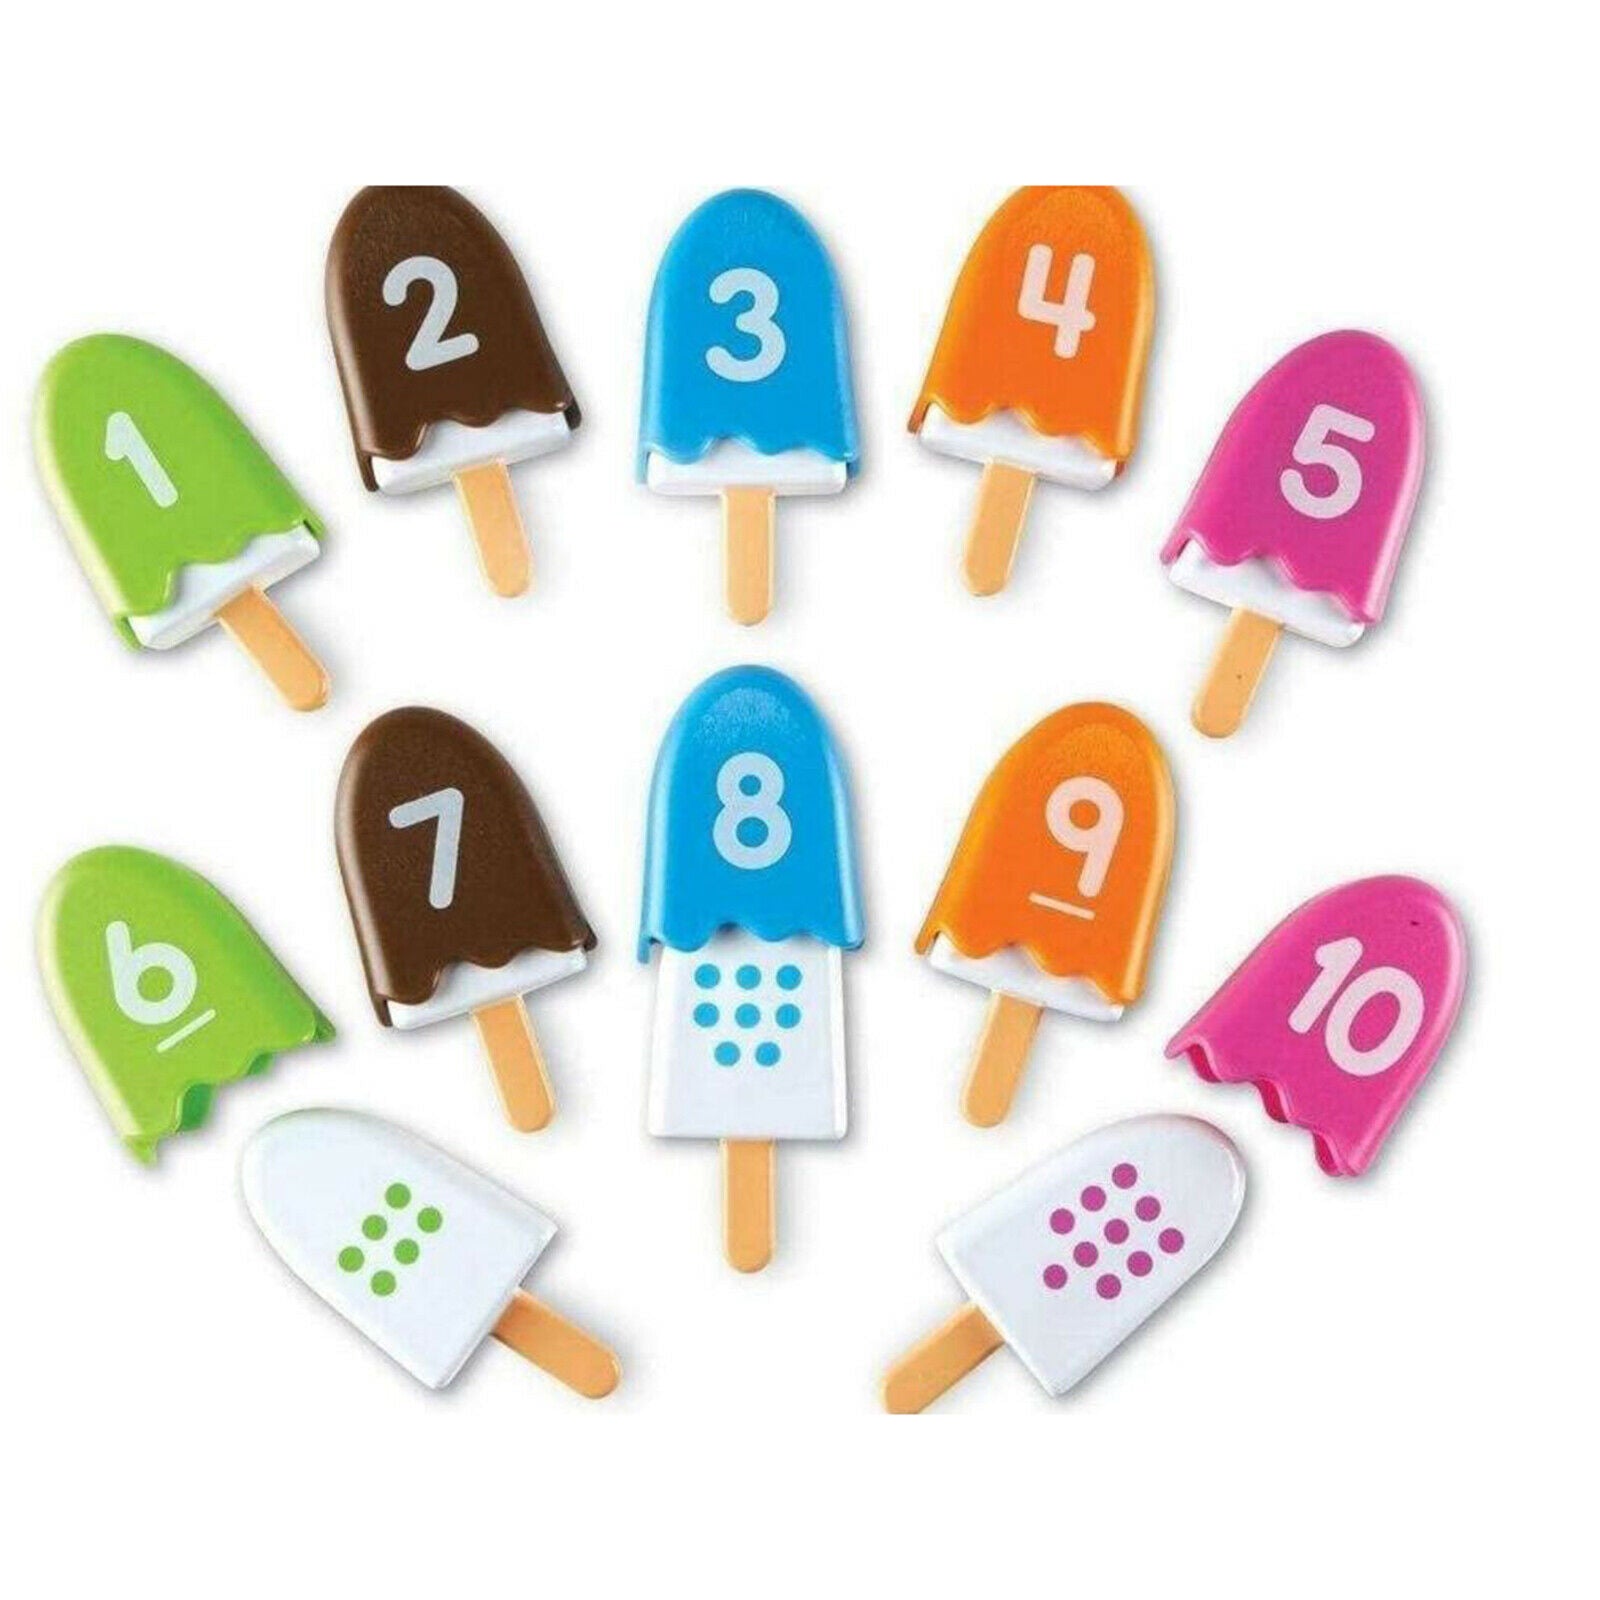 10x Number Matching Game Early Developmental Toys for Unisex Children